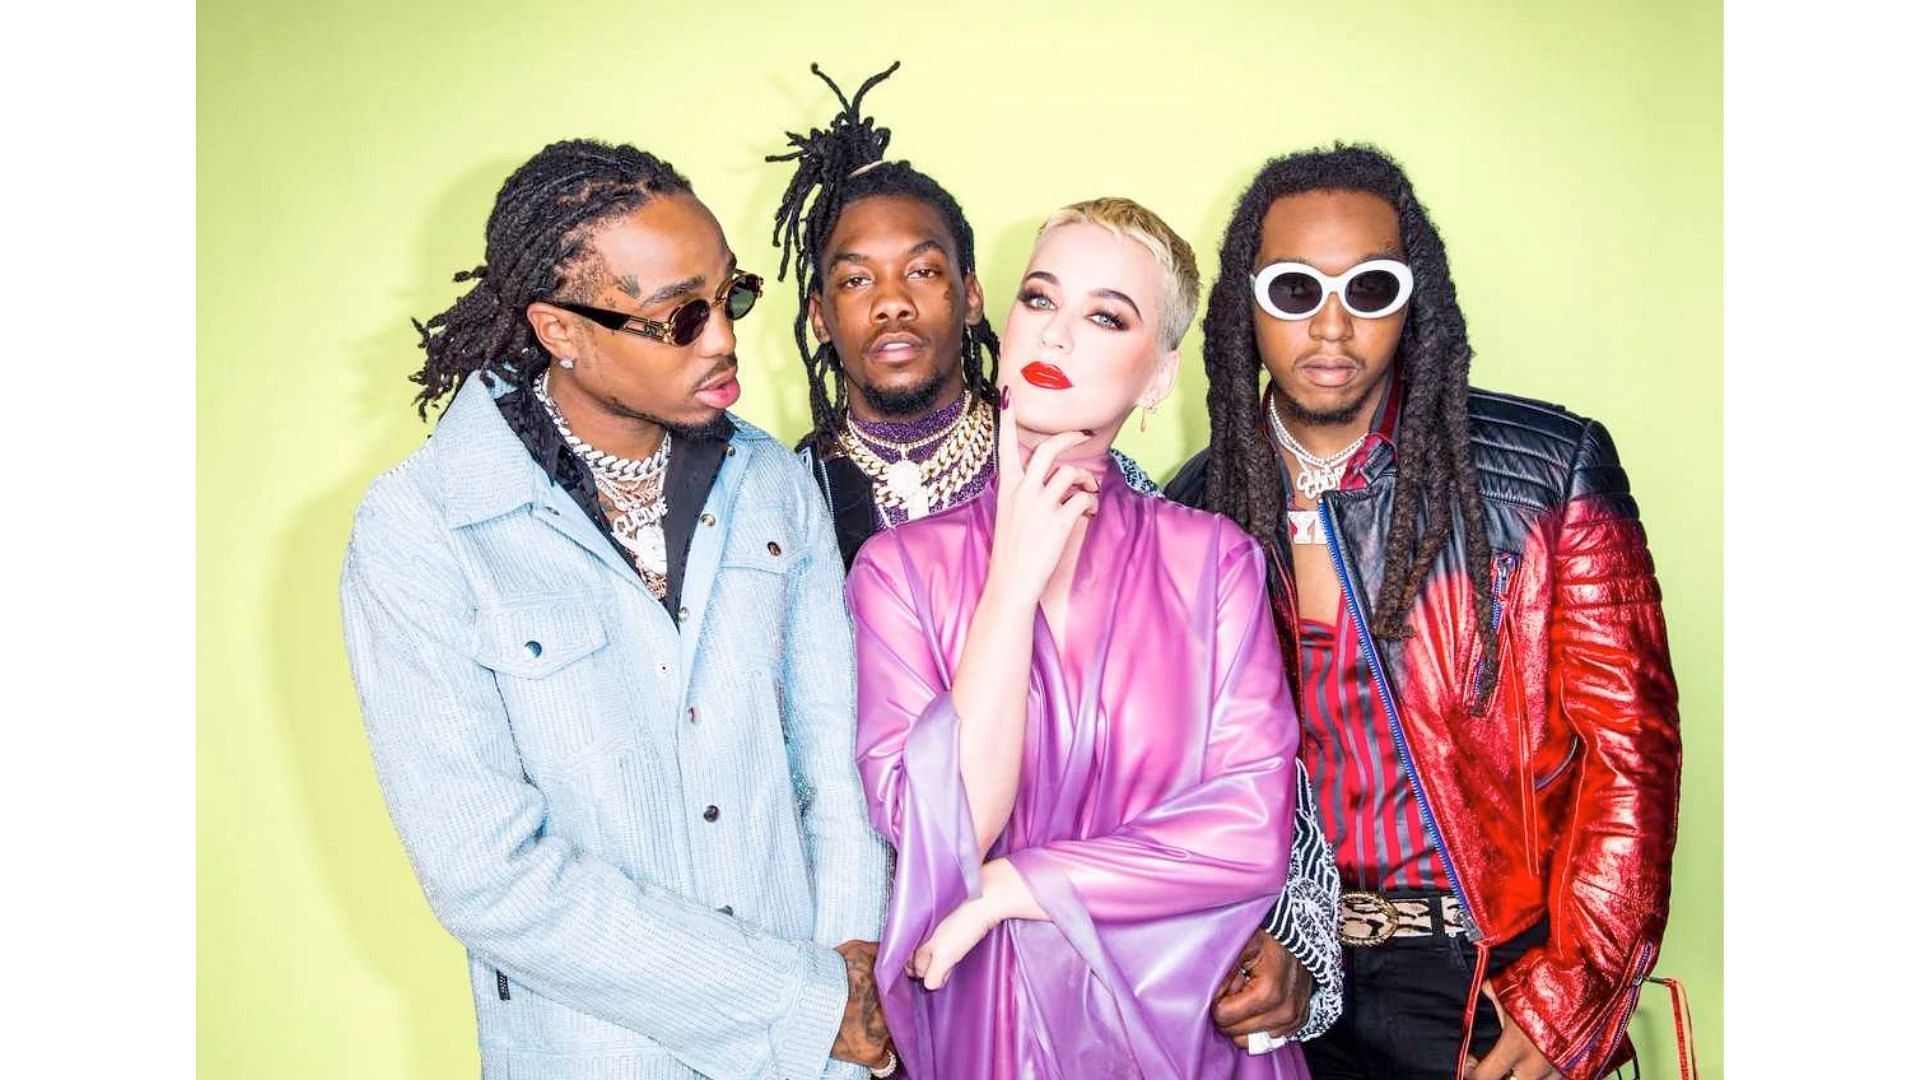 Migos and Katy Perry in the Bon Appetit promo shoot (image via Instagram)